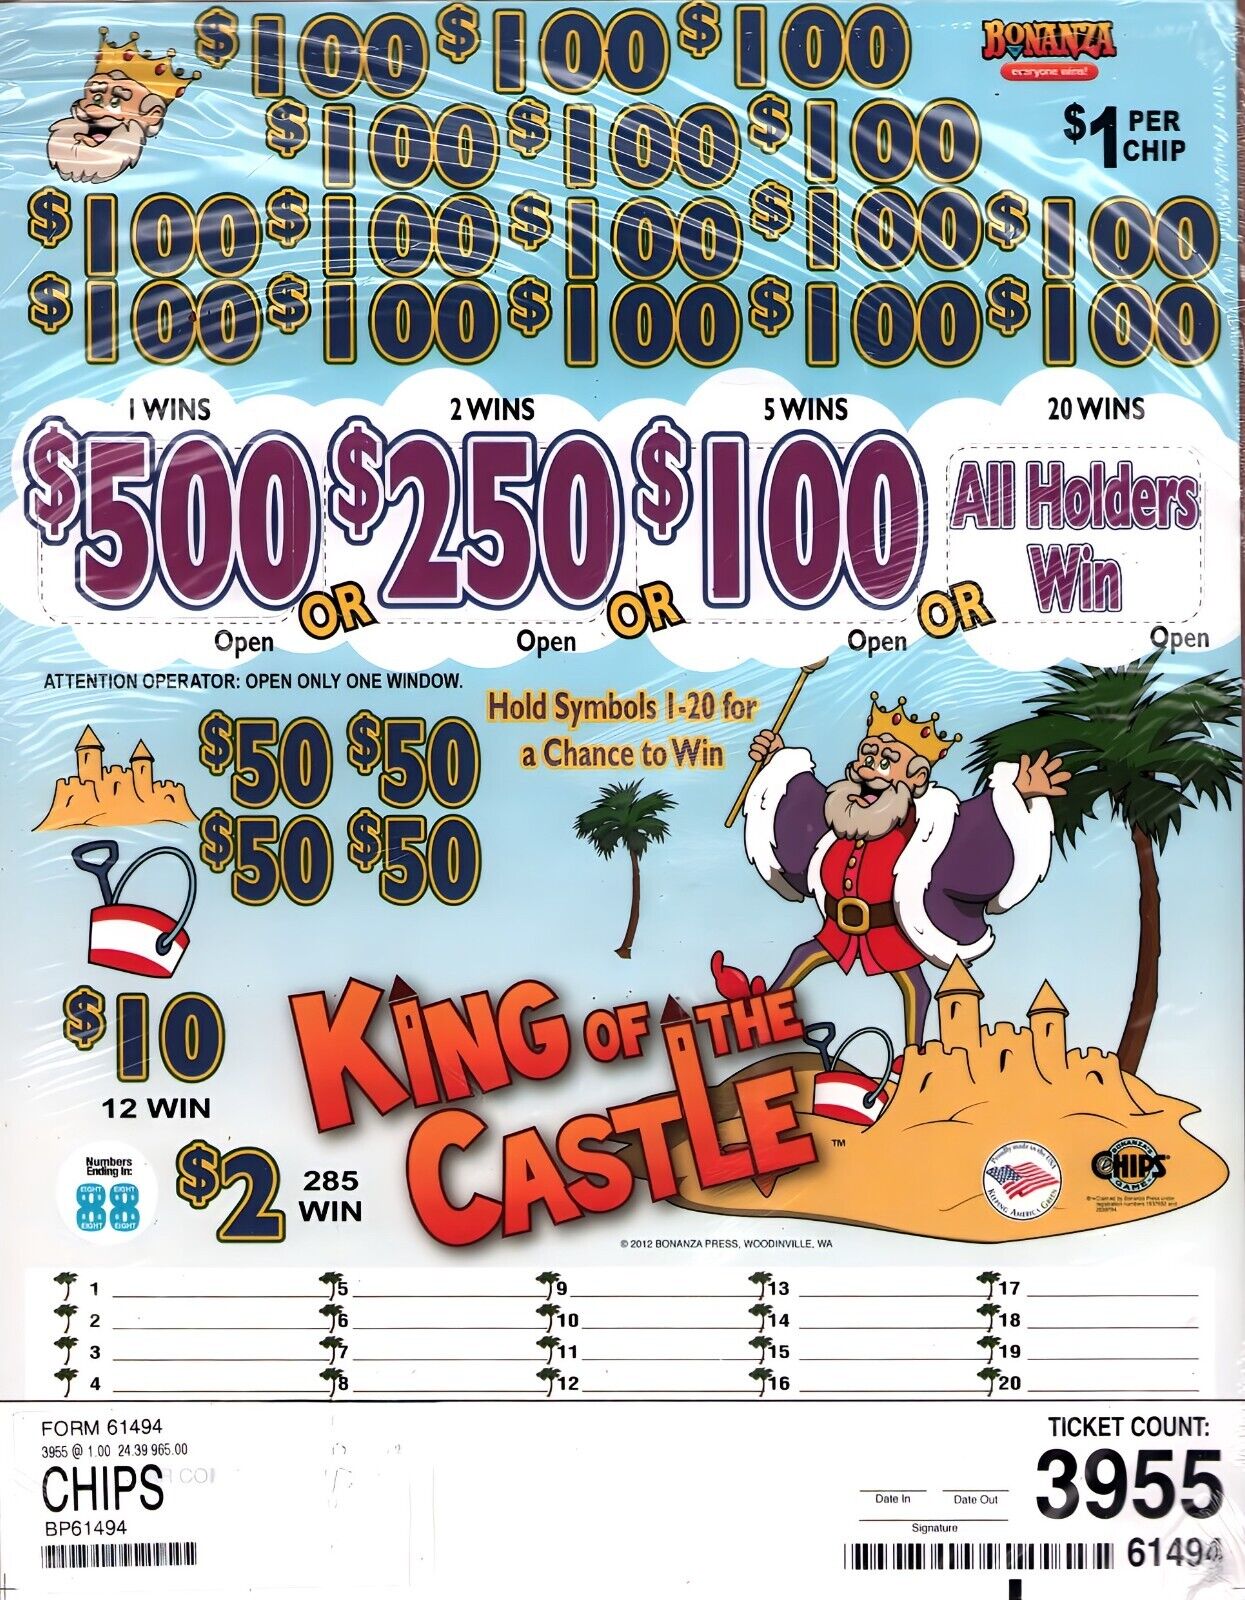 New Pull Tickets - Chip Tickets - Holder - King of the Castle